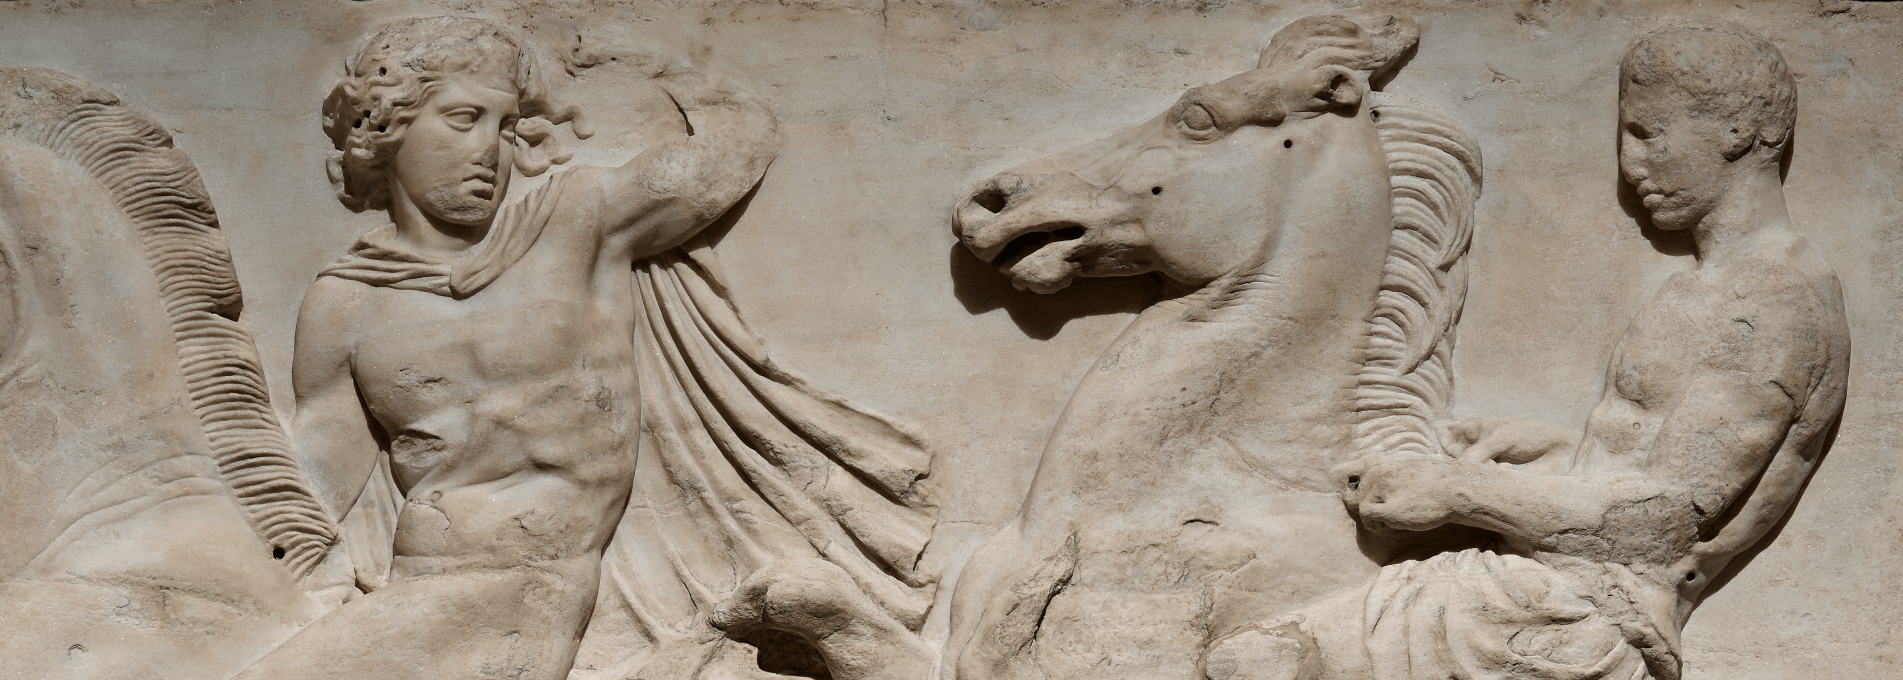 West frieze of the Parthenon (detail) © The Trustees of the British Museum